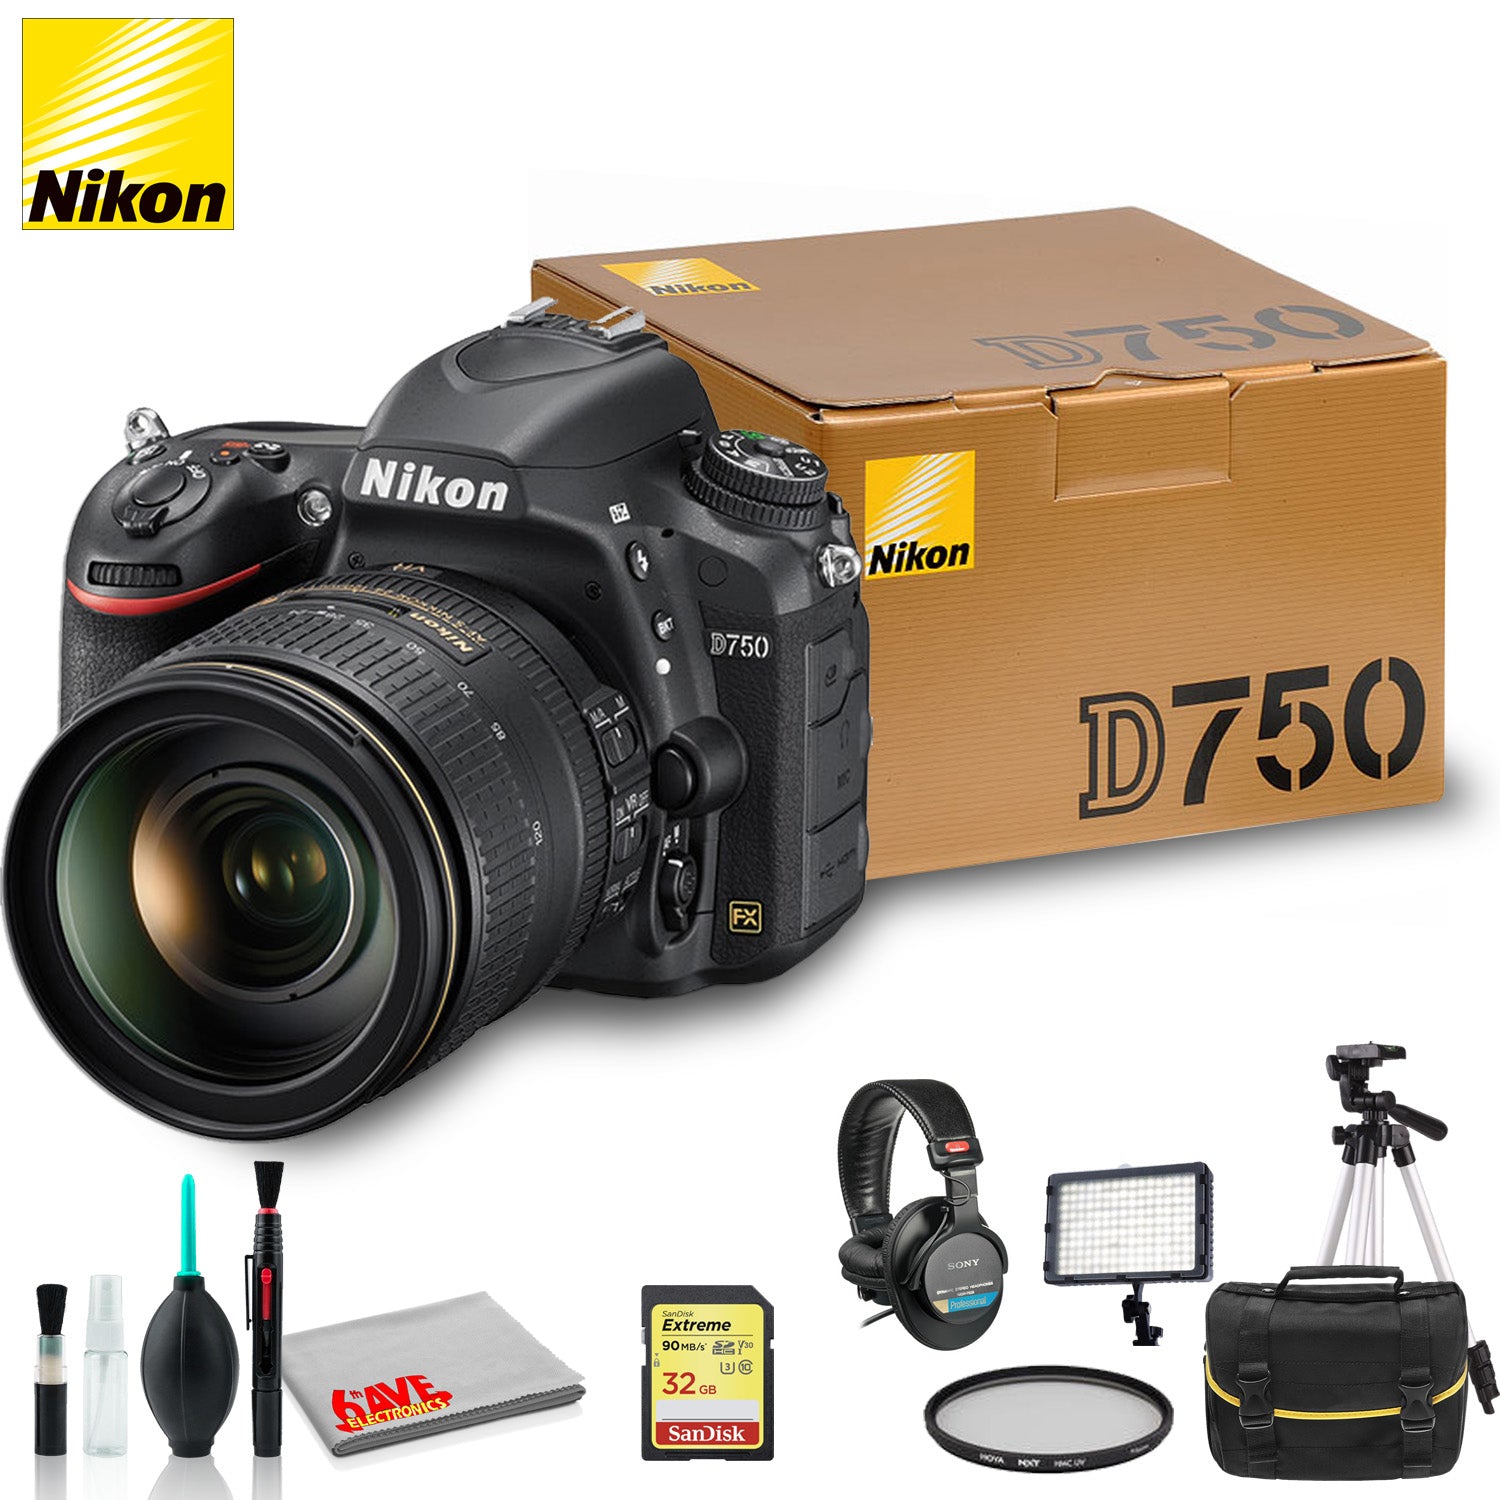 Nikon D750 DSLR Camera with 24-120mm Lens + Professional Stereo Headphones, Sandisk 32 GB SD Card and More